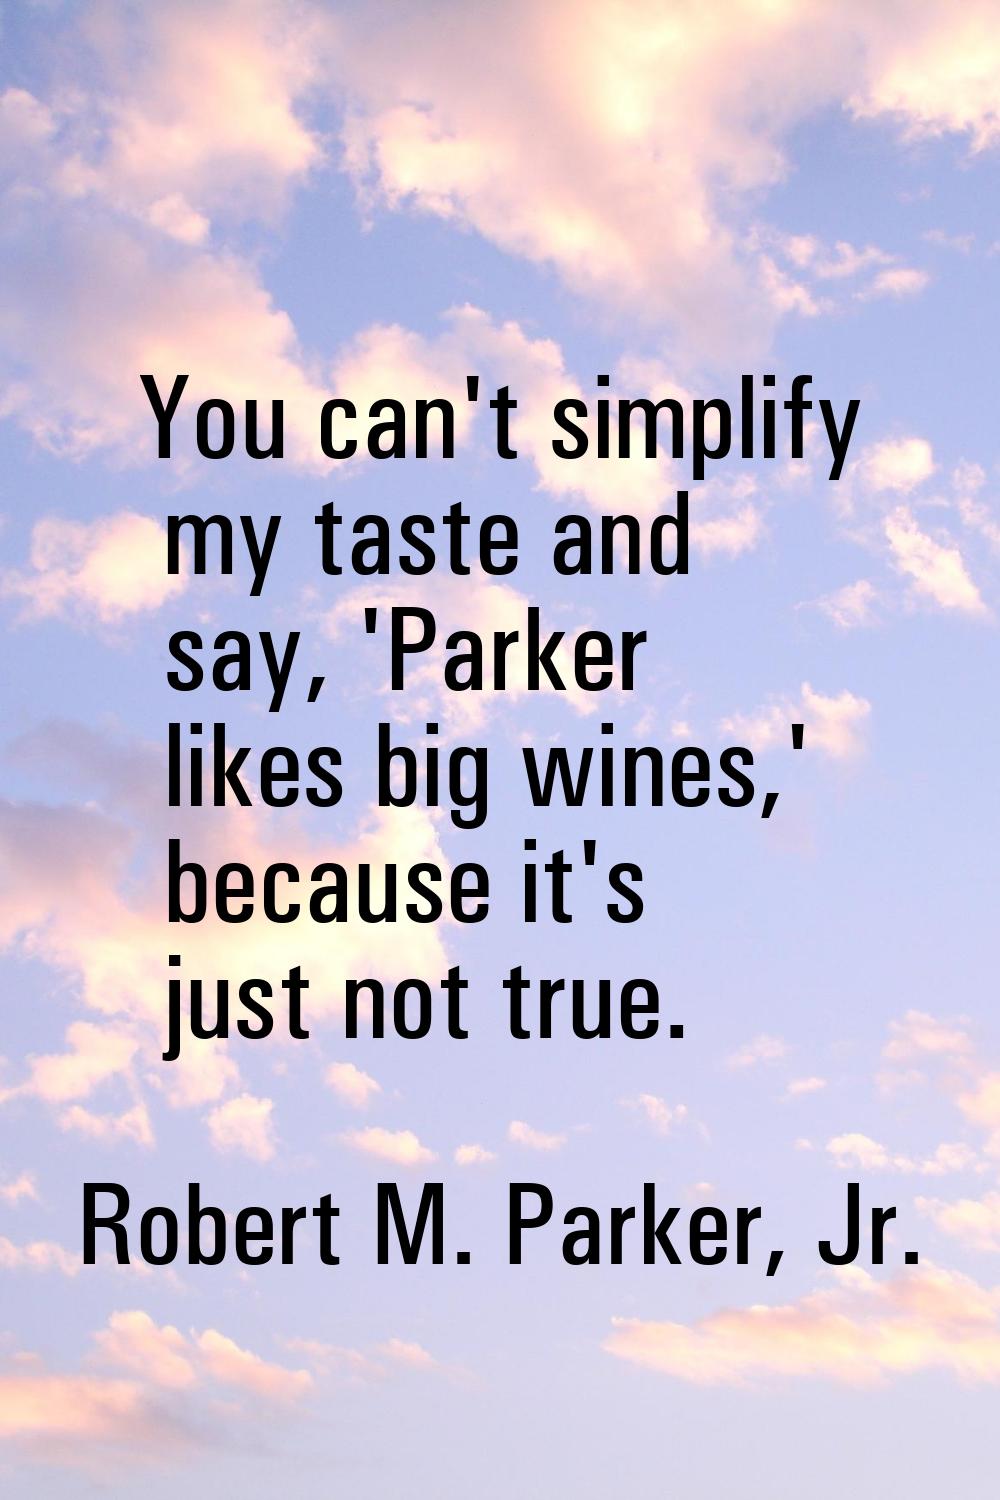 You can't simplify my taste and say, 'Parker likes big wines,' because it's just not true.